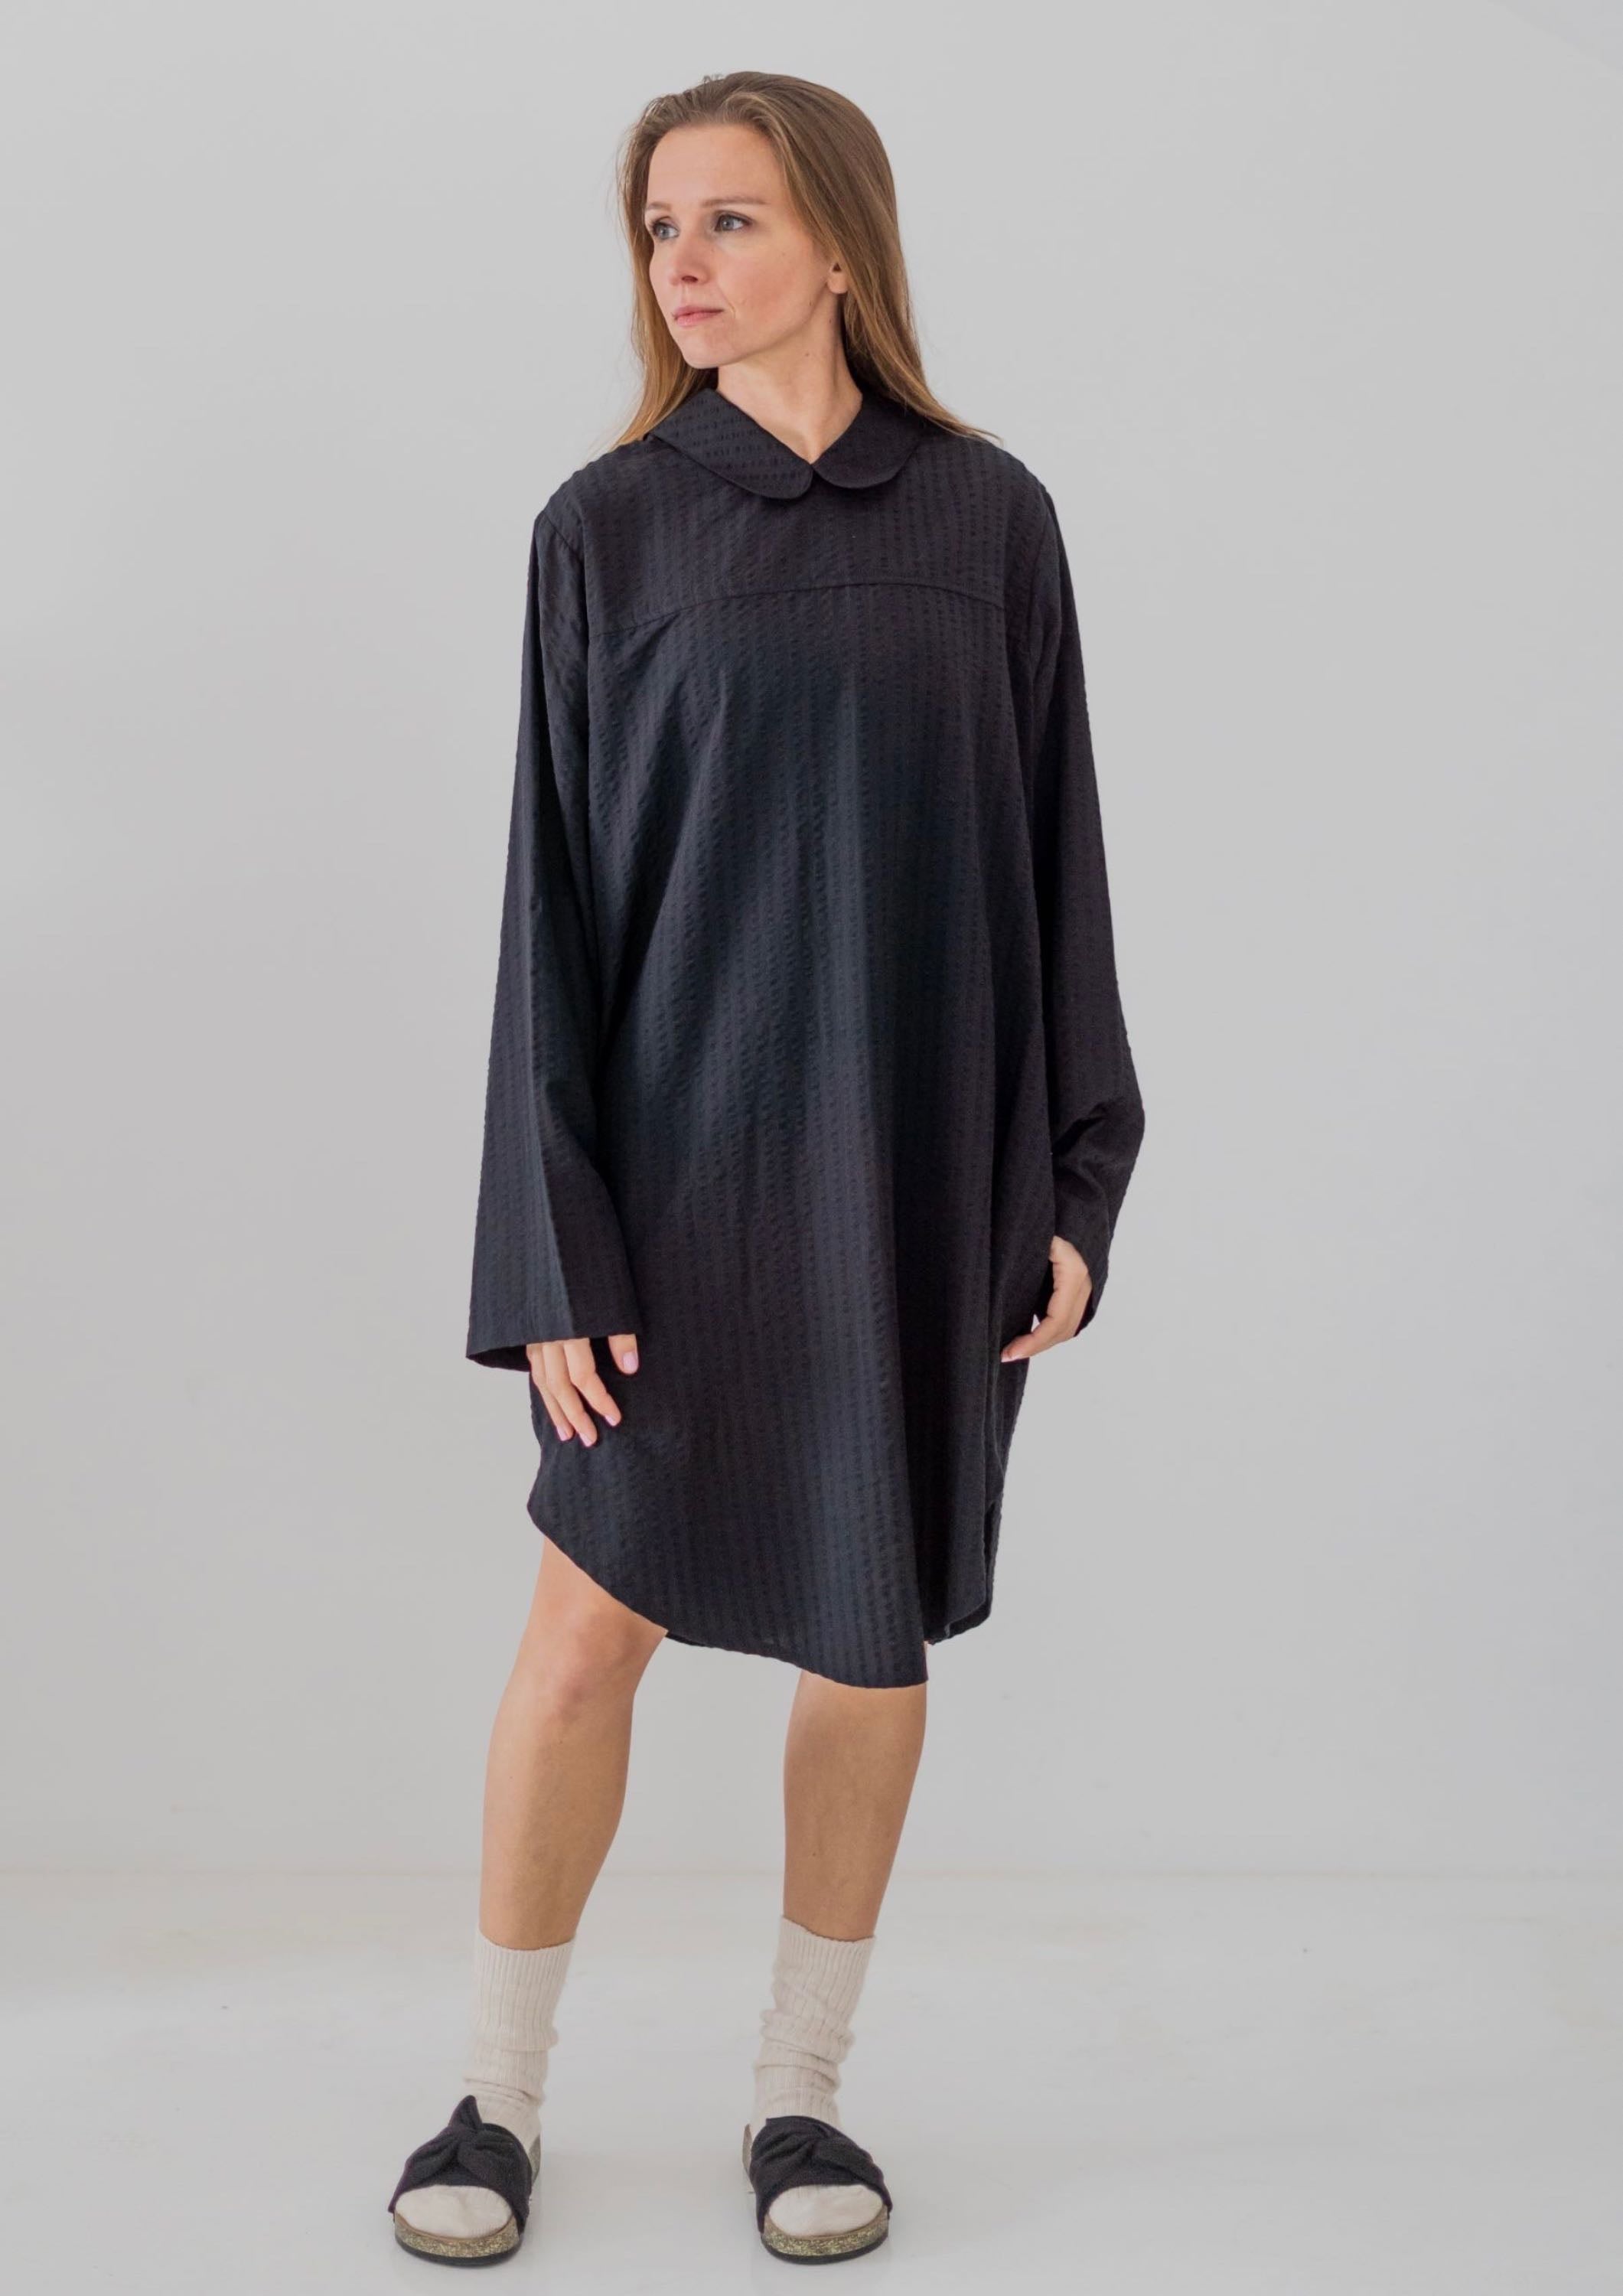 Reversible soft shirt. Can be worn as a shirt, dress or jacket. With two collars, roll-up sleeves, practical pockets and buttoned full-length opening.  100% Tencel. With recycled buttons.  In texture black.